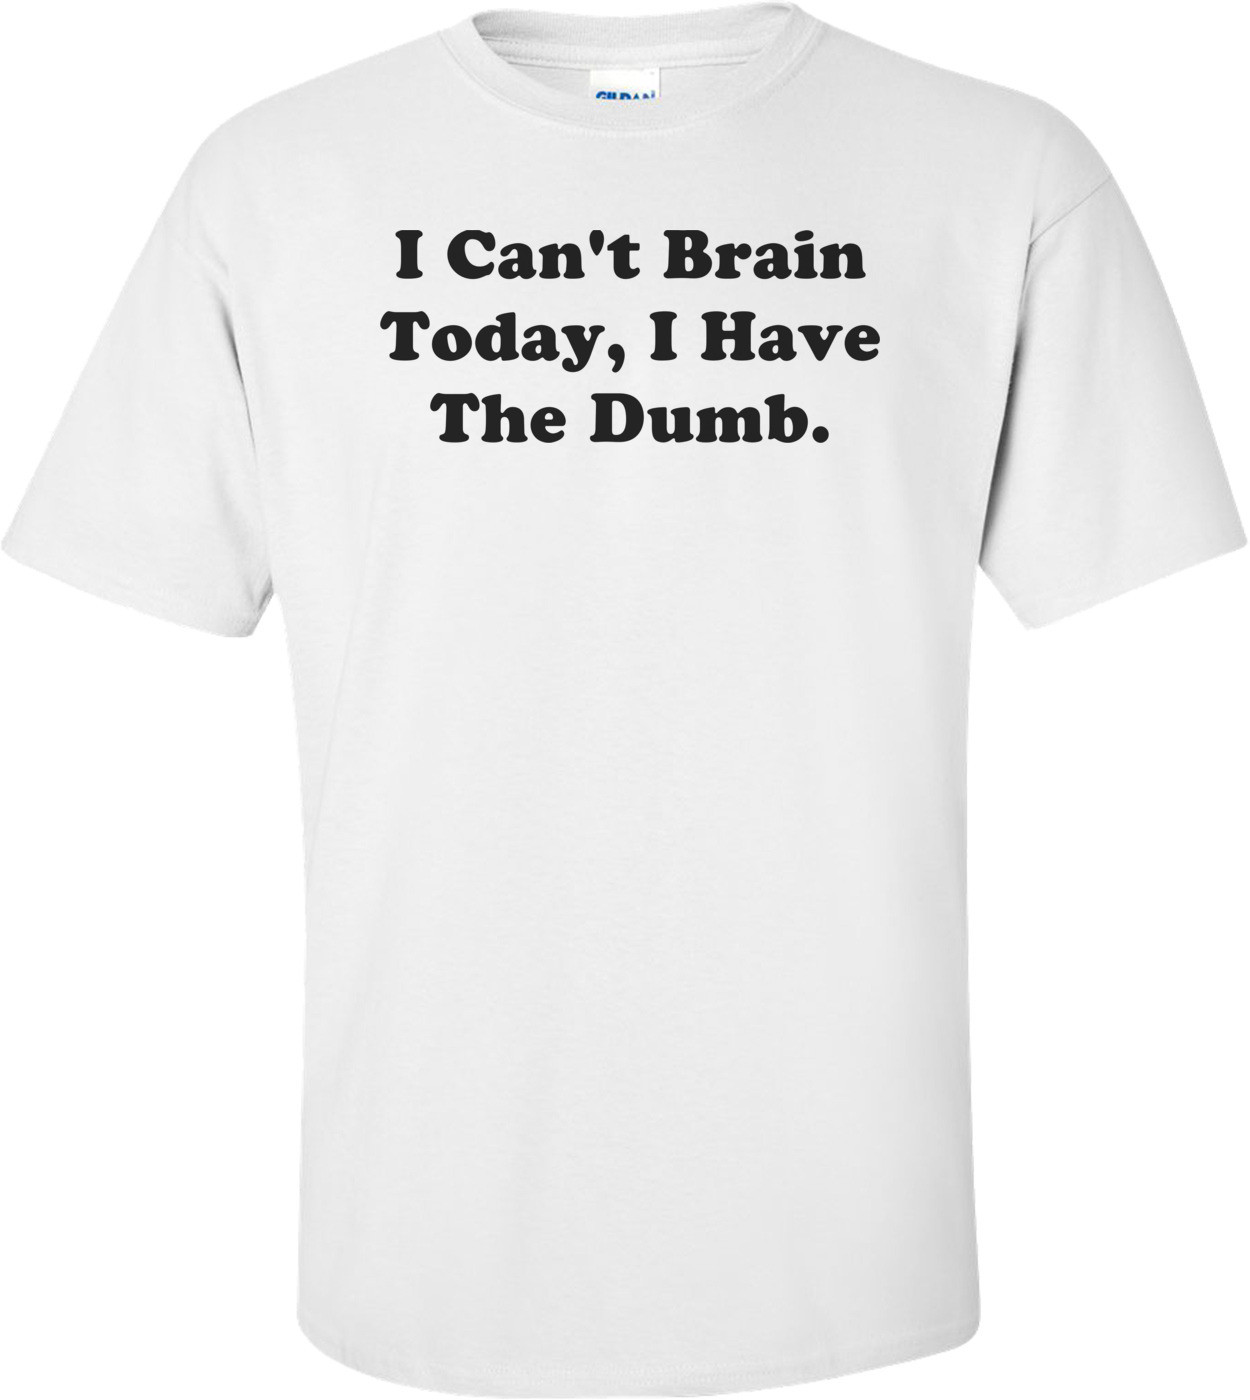 I Can't Brain Today, I Have The Dumb.